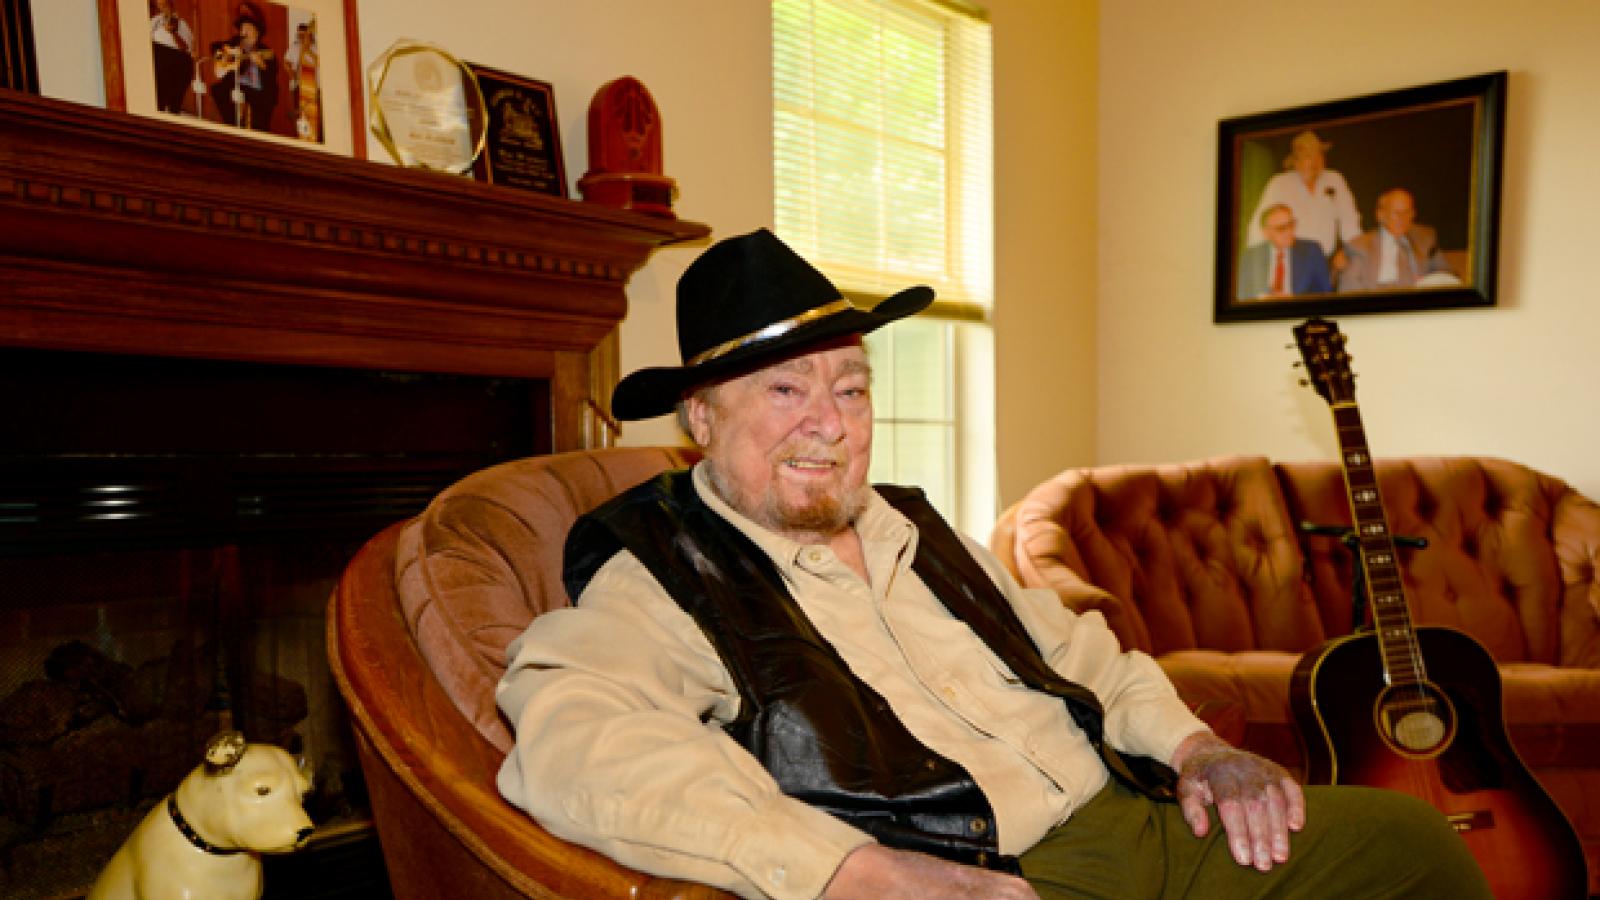 A man wearing a cowboy hat sits in a chair with a guitar next to him.